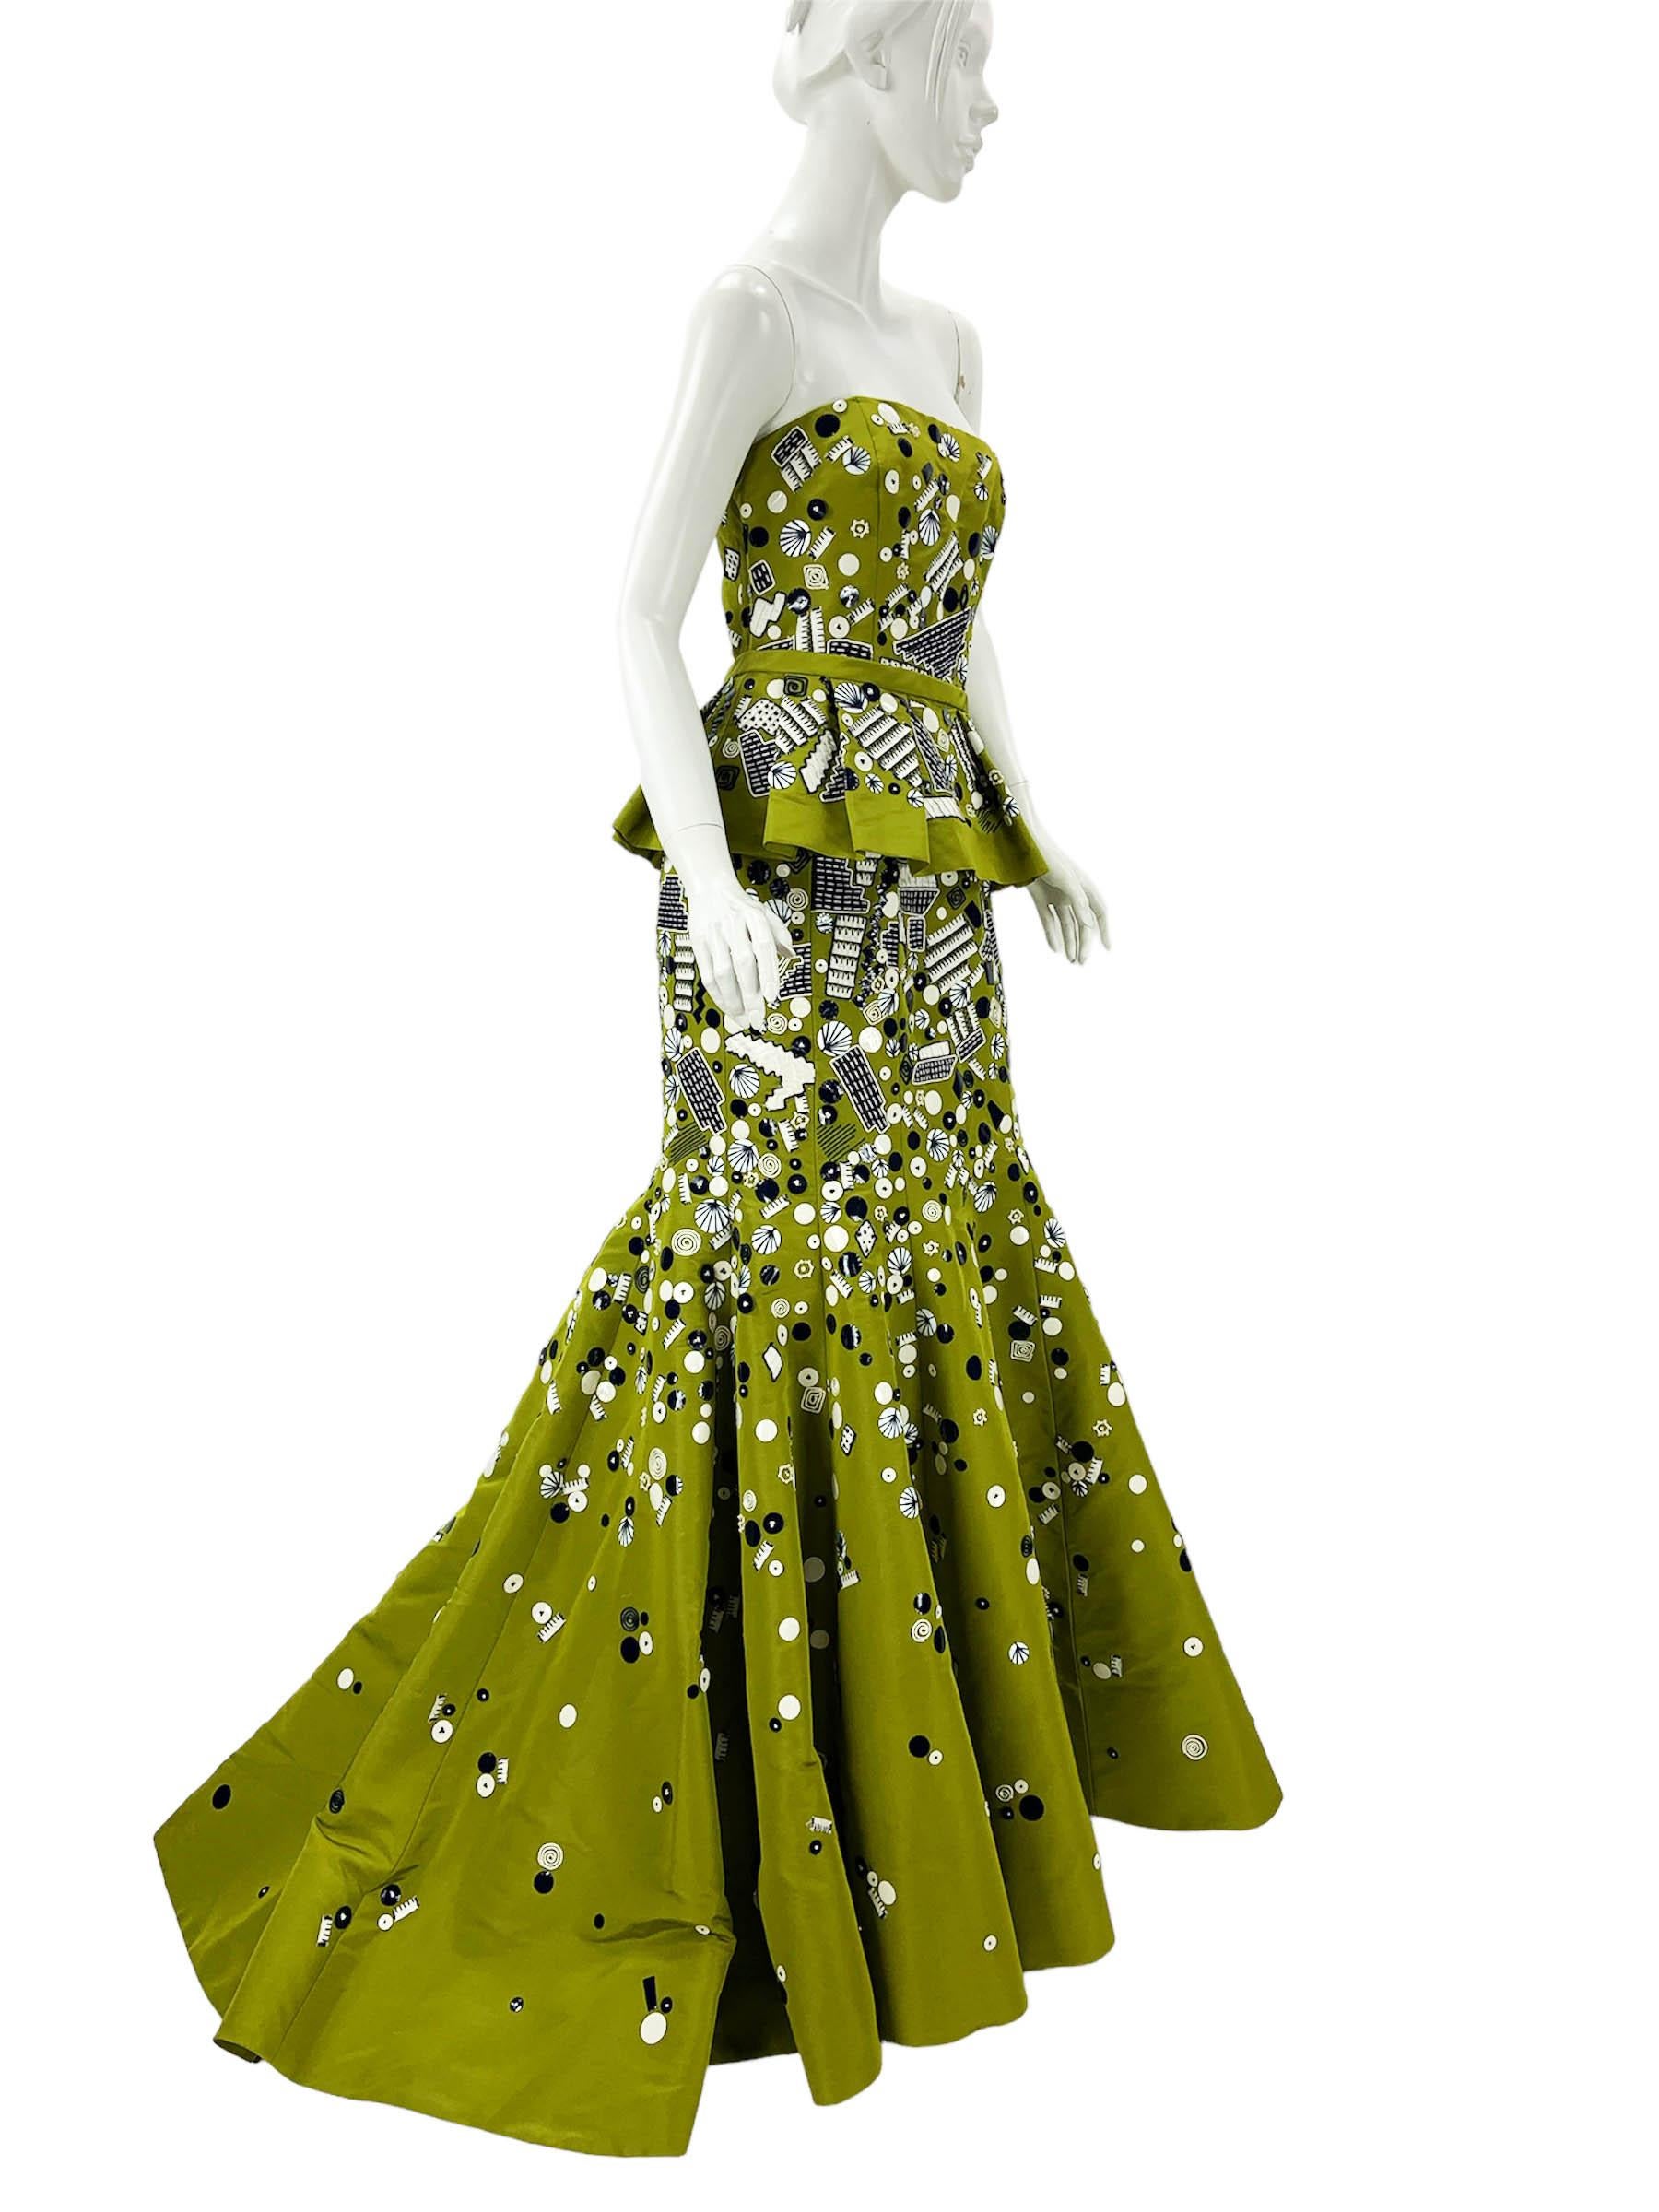 NWT Oscar de la Renta Green Embellished Silk Taffeta Peplum Dress Gown
This Strapless Gown Embodies the Facets of Timeless Fashion and Grace Effortlessly. 
S/S 2009 Collection 
US size - 10 
Fully Embellished and Embroidered, Removable Peplum Belt,